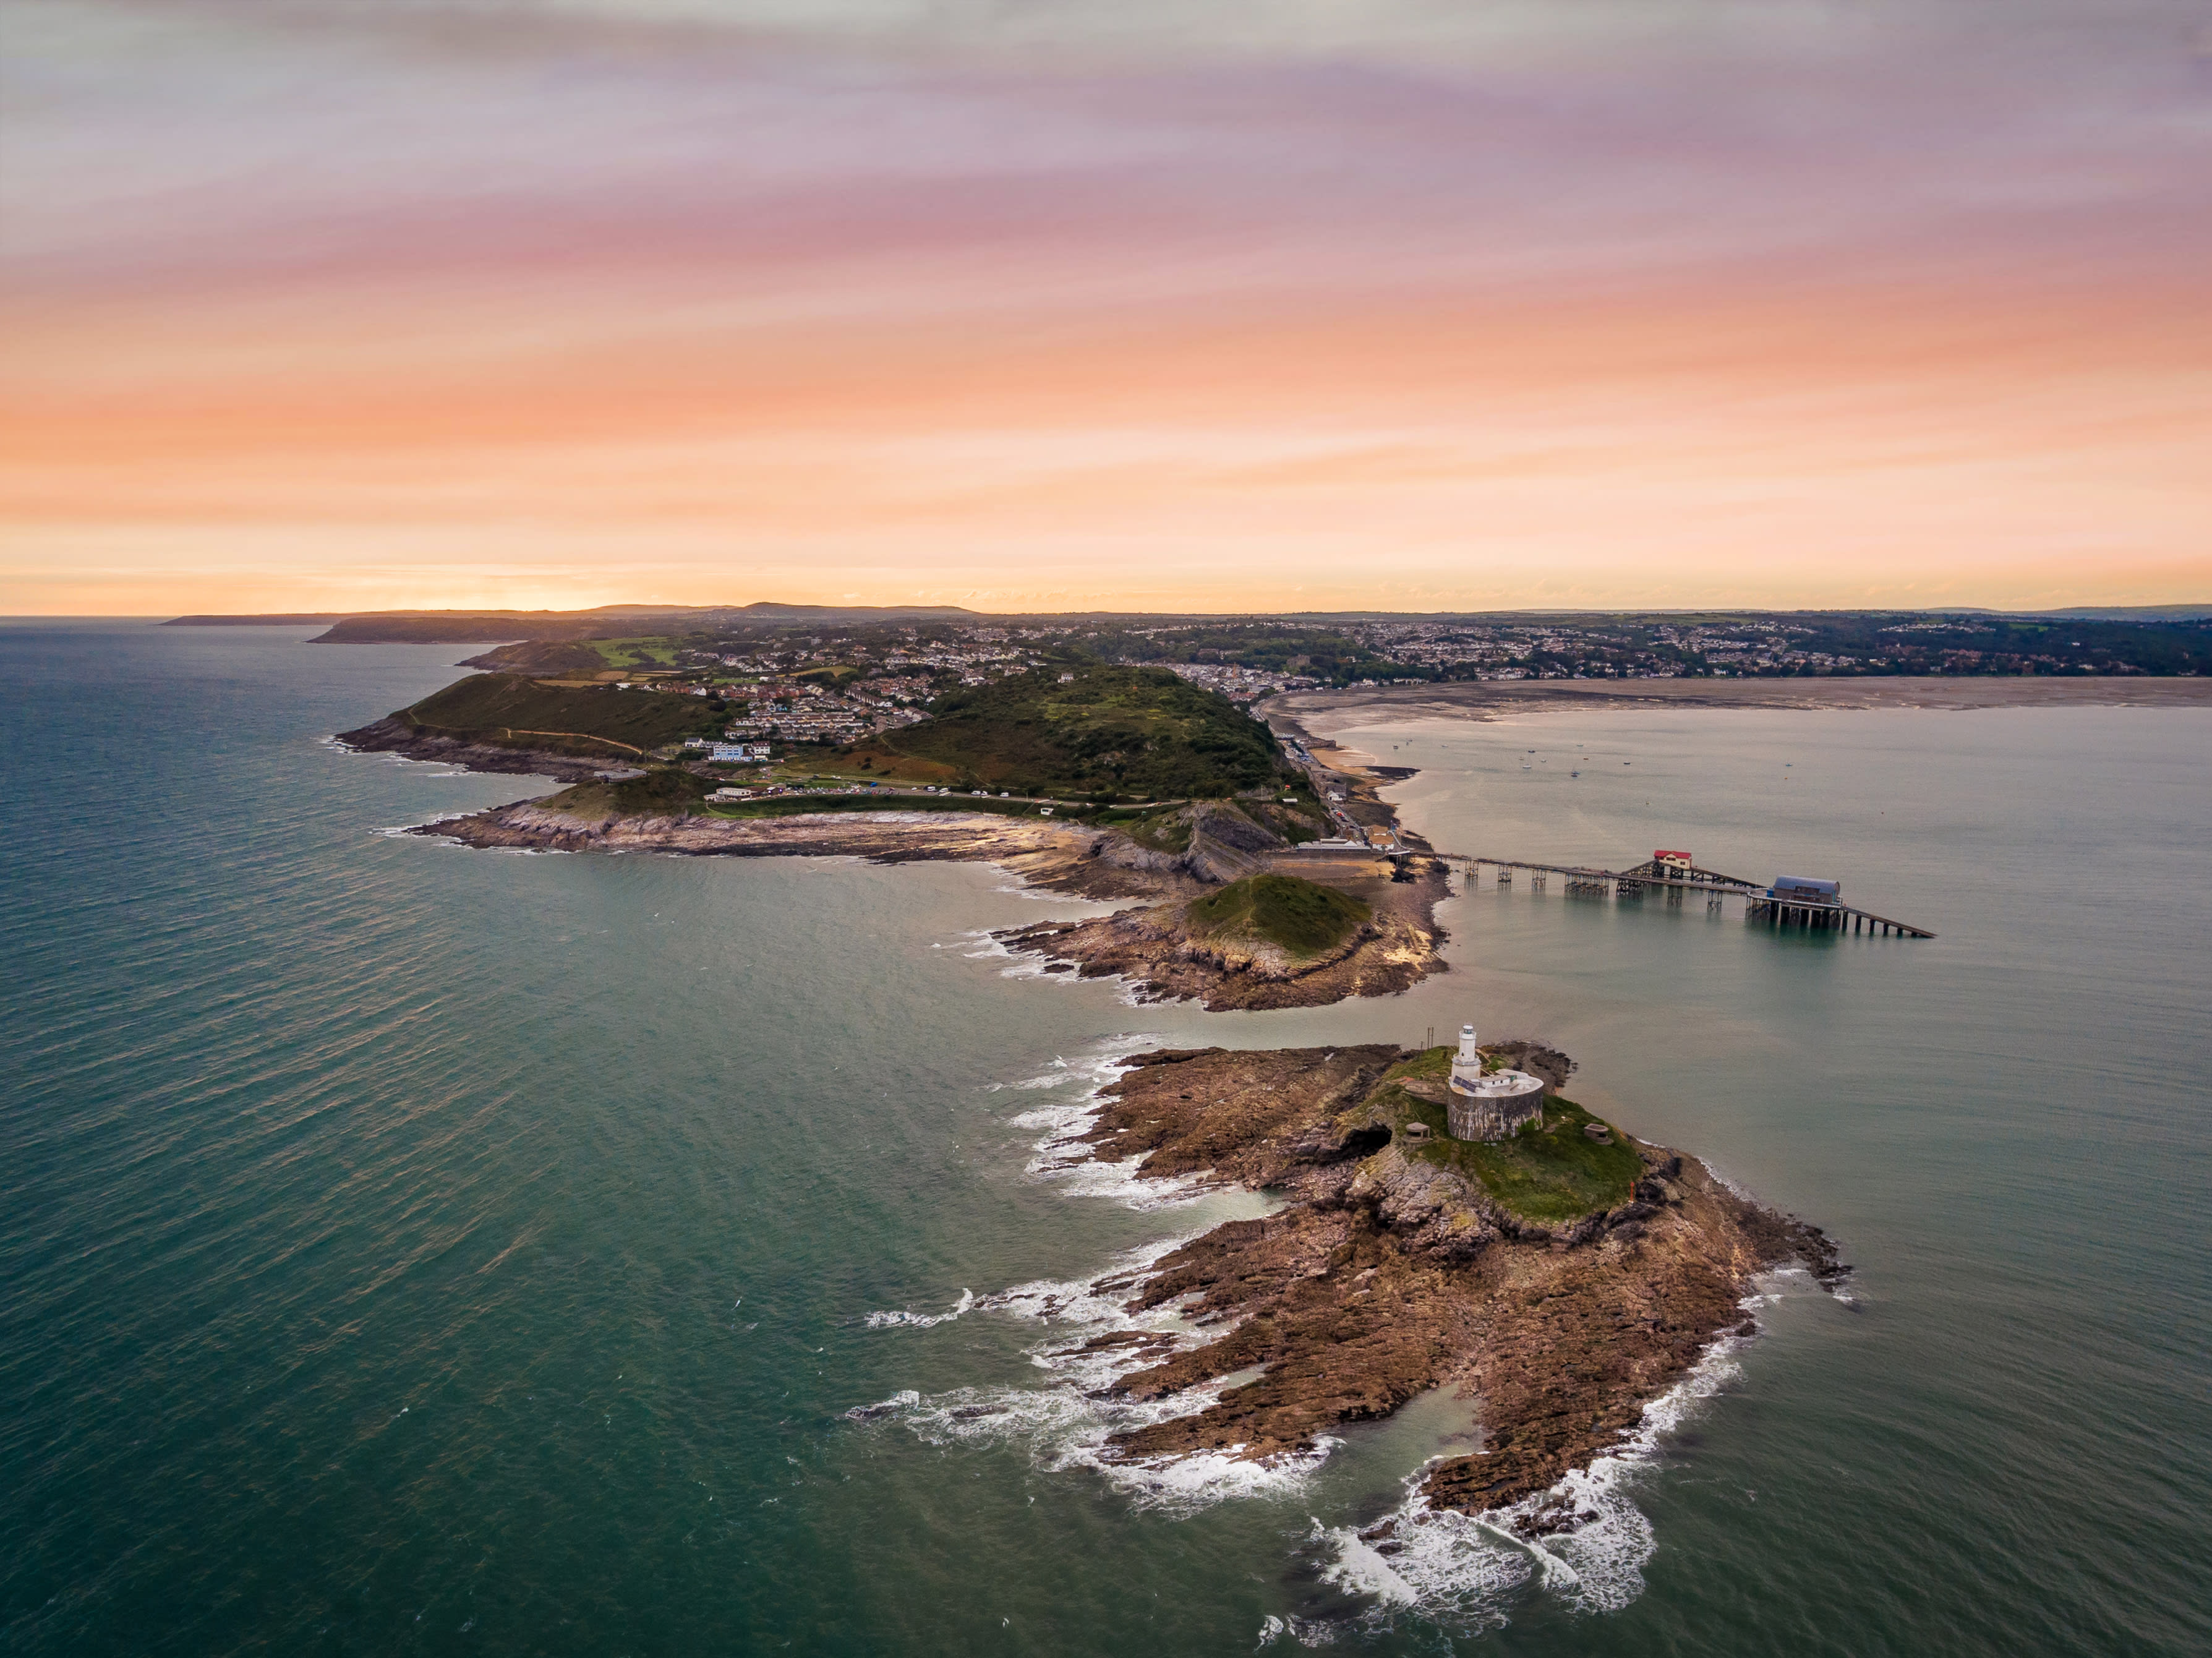 6436-Aerial Lighthouse Mumbles [Hi res]